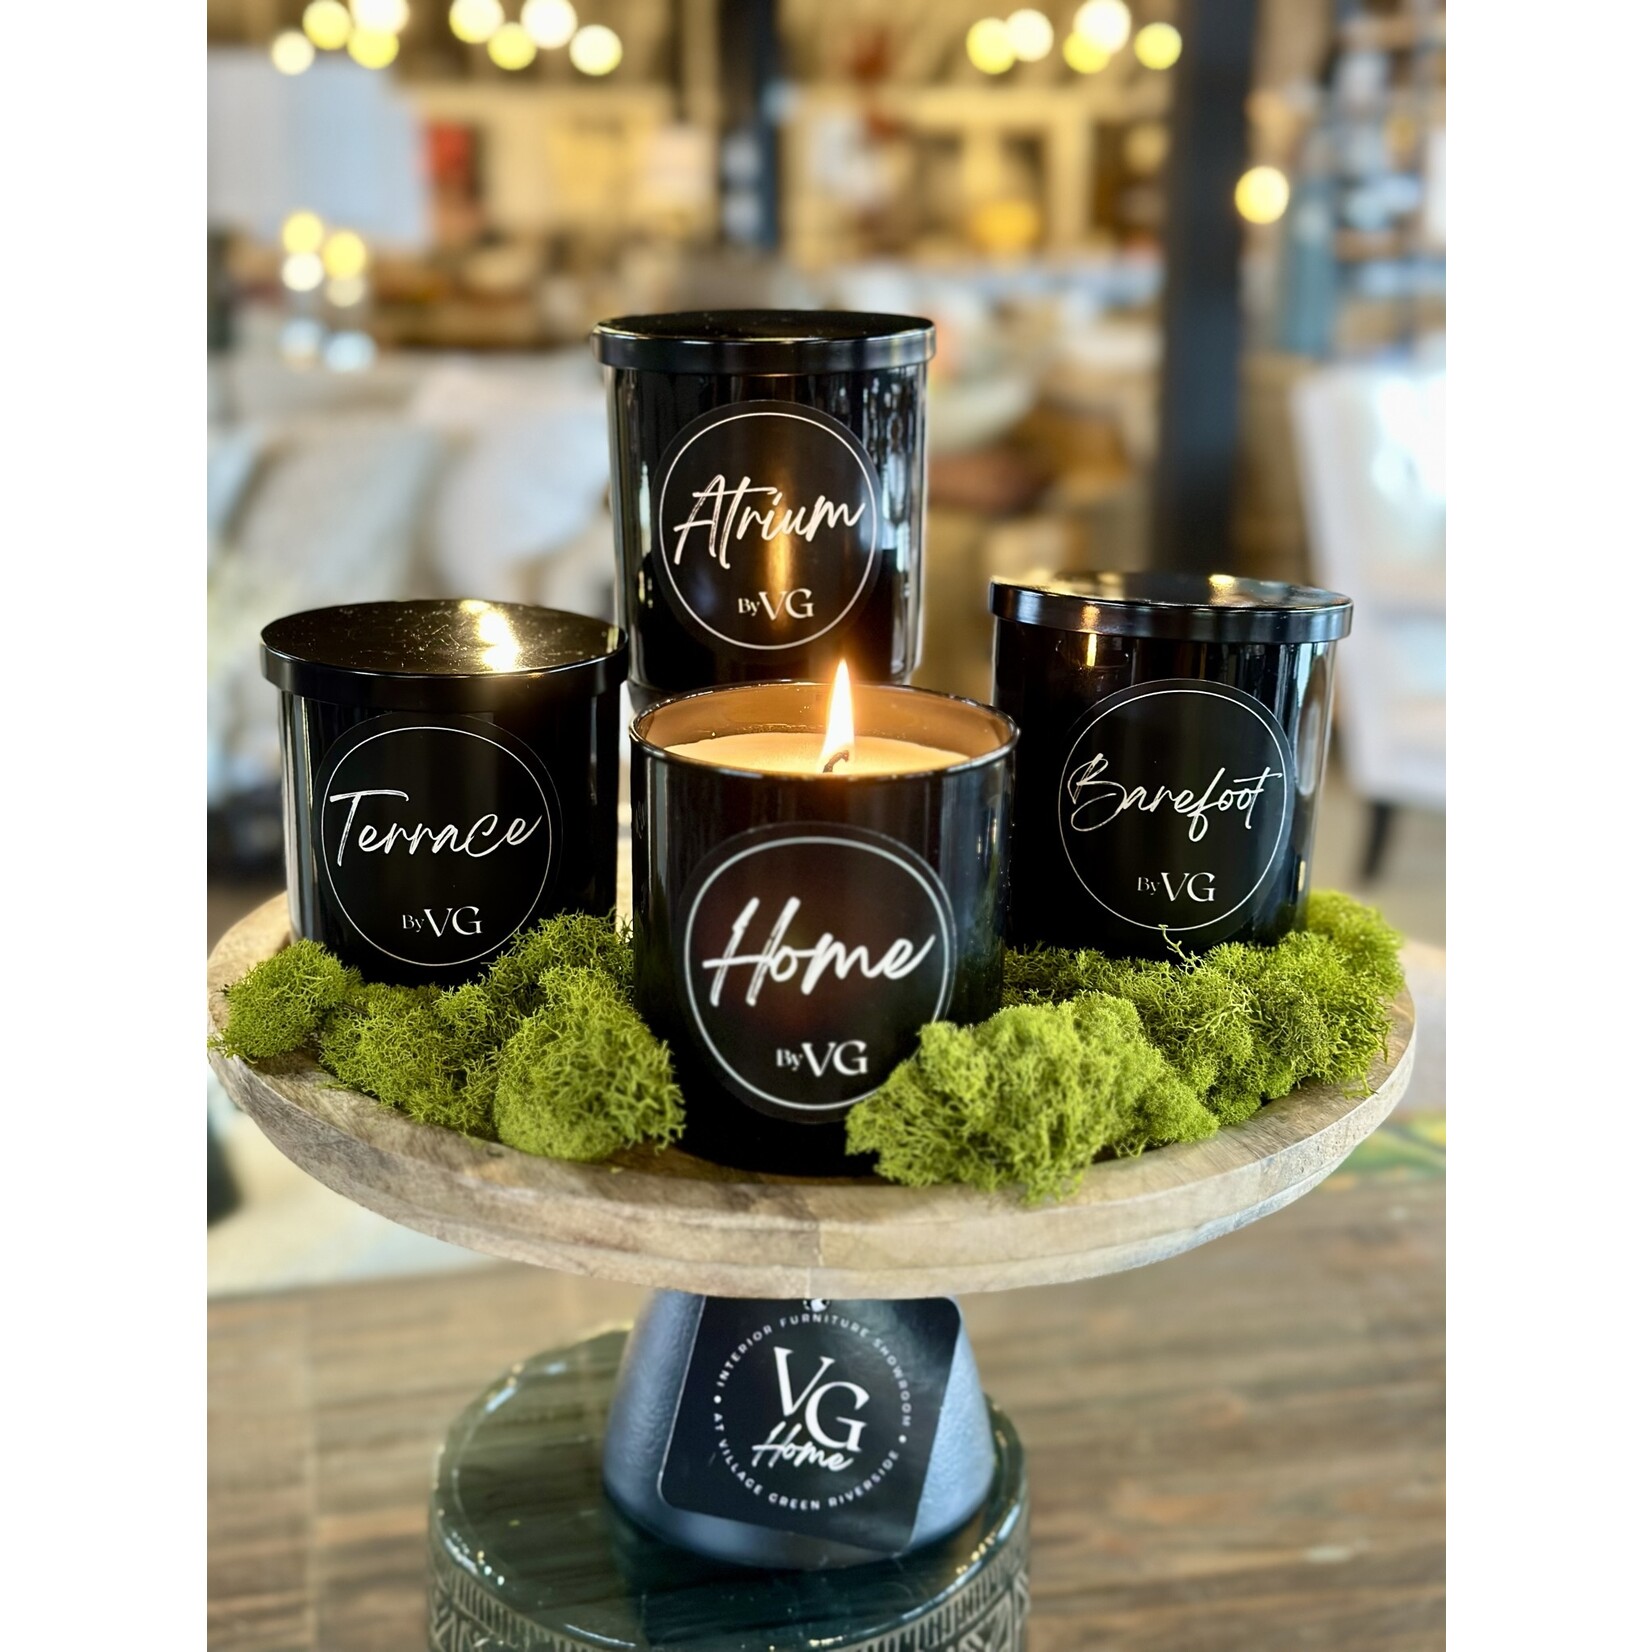 CANDLE CREST "HOME" By VG Signature Candle